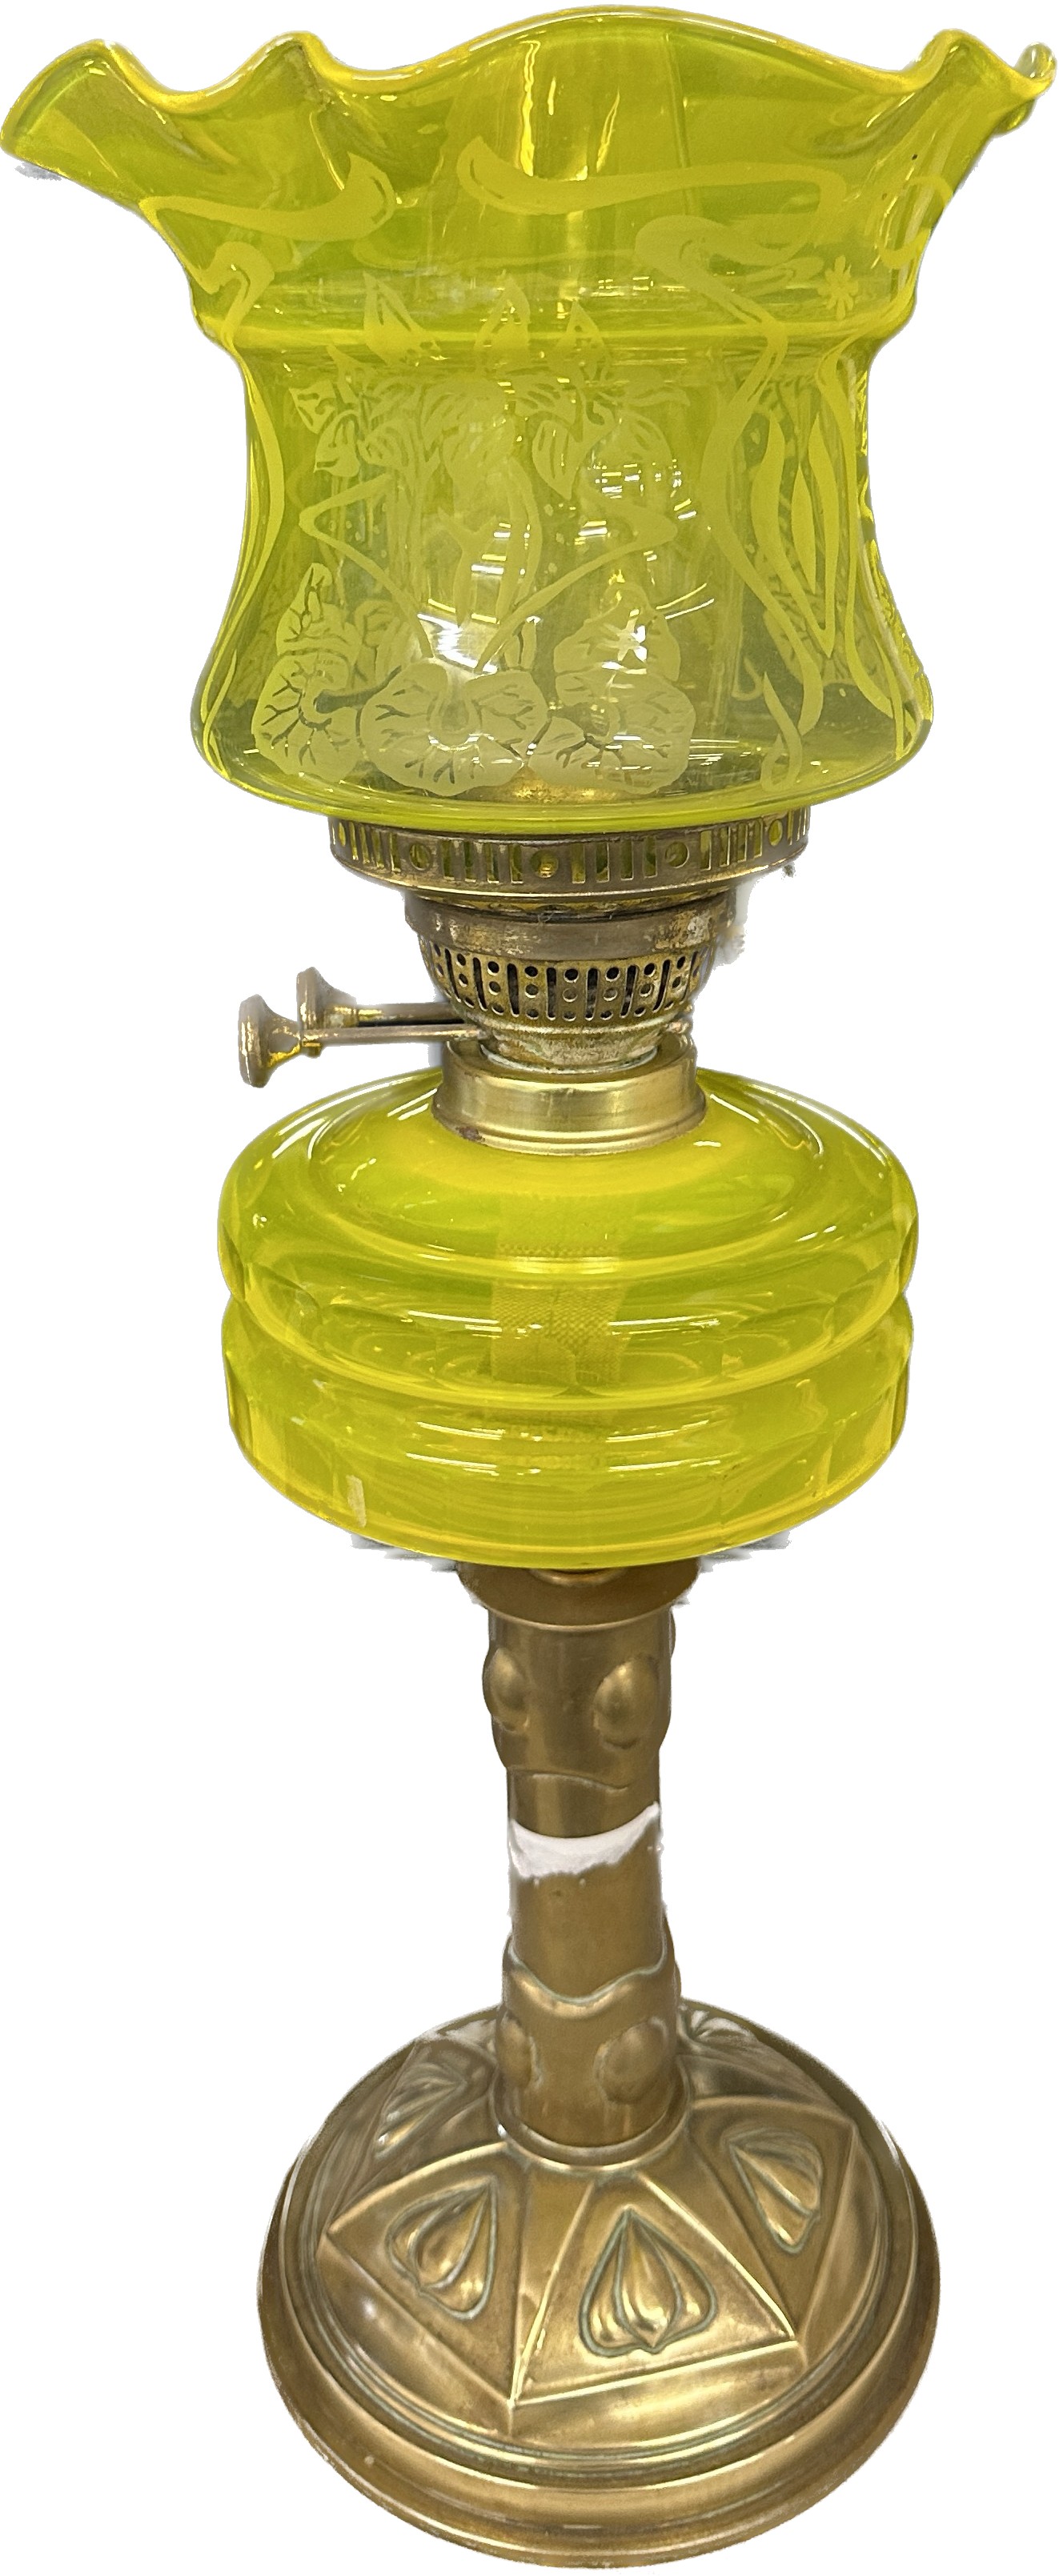 Antique brass bass yellow glass oil lamp complete with funnel and shade - Image 2 of 4